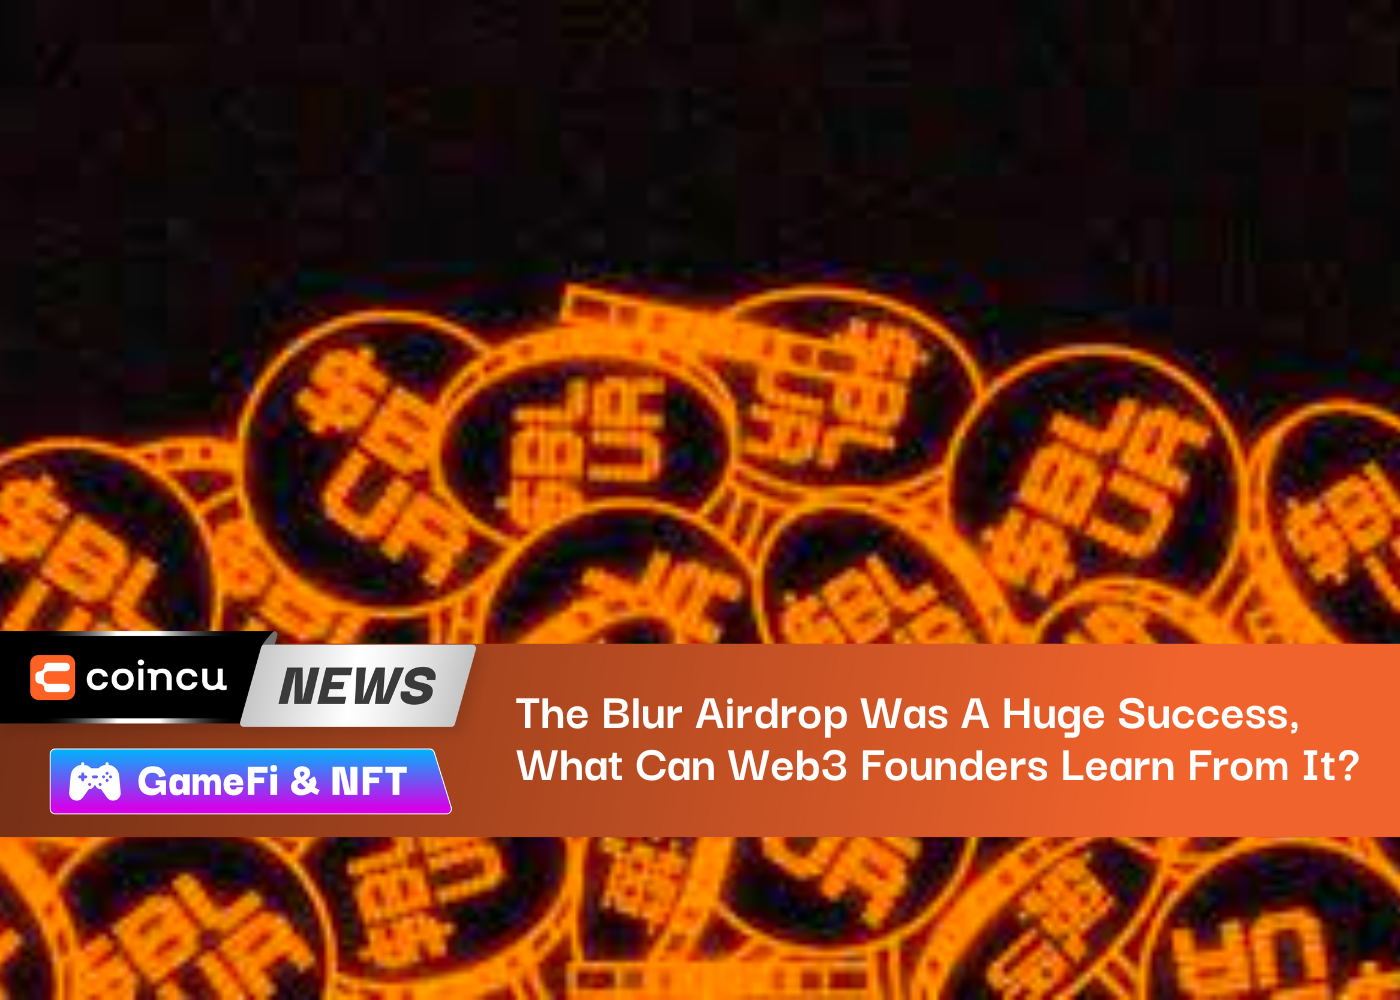 The Blur Airdrop Was A Huge Success, What Can Web3 Founders Learn From It?